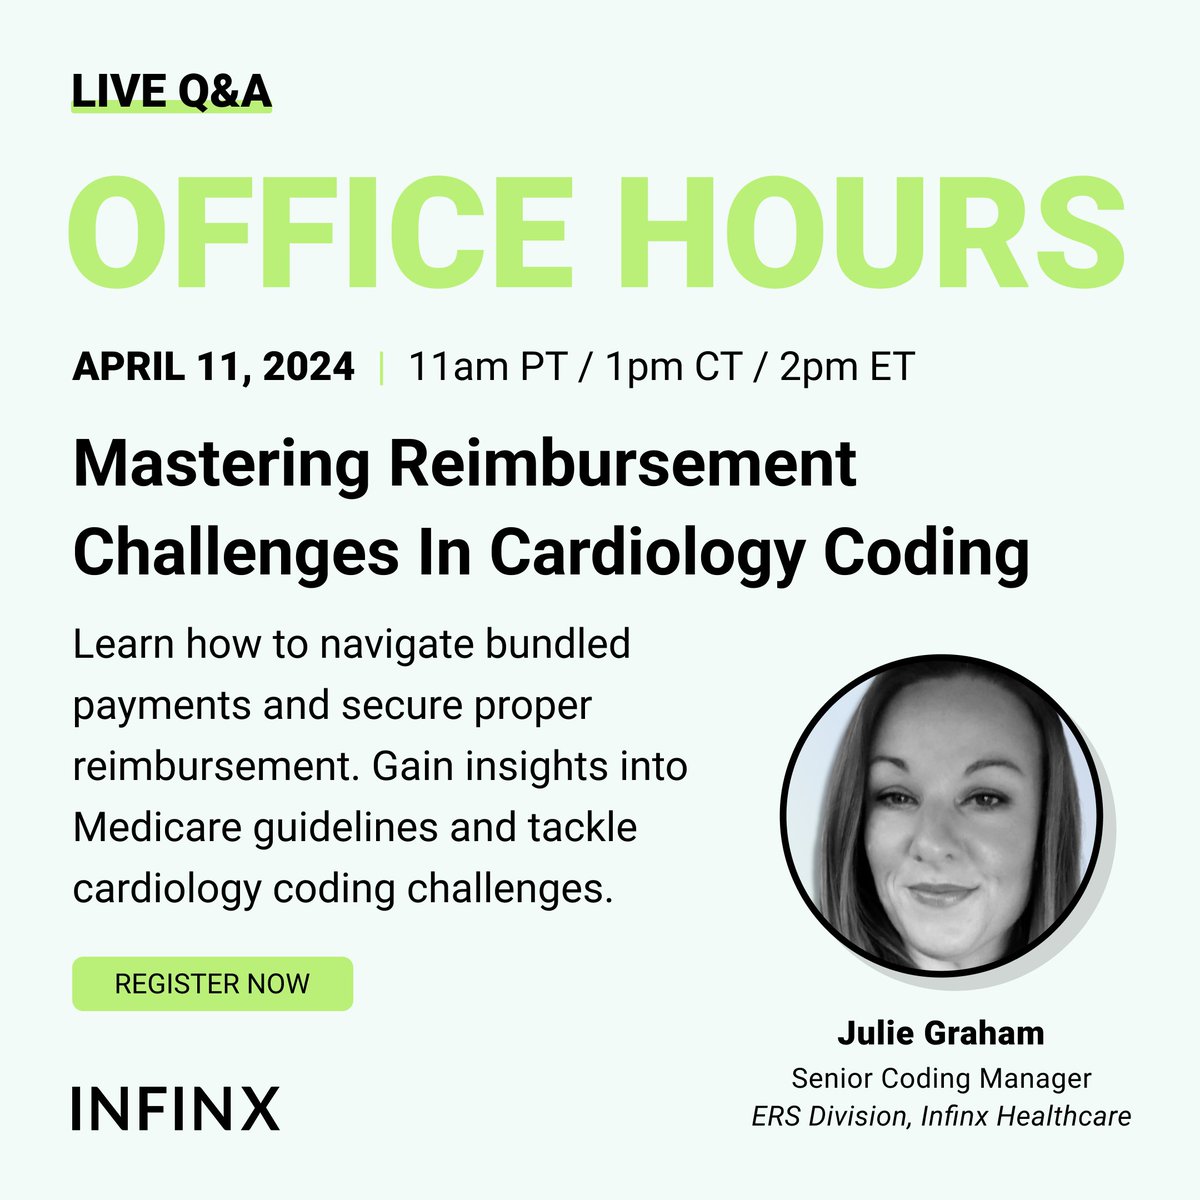 Today, Julie Graham, Senior Coding Manager, will “unbundle” top cardiology coding challenges:

✅ Medicare and OIG guidelines.
✅ Securing reimbursement.
✅ Real-world coding practices.

hubs.li/Q02sBbx50

#CardiologyCoding #RCM #RCMAutomation #HealthcareOperations